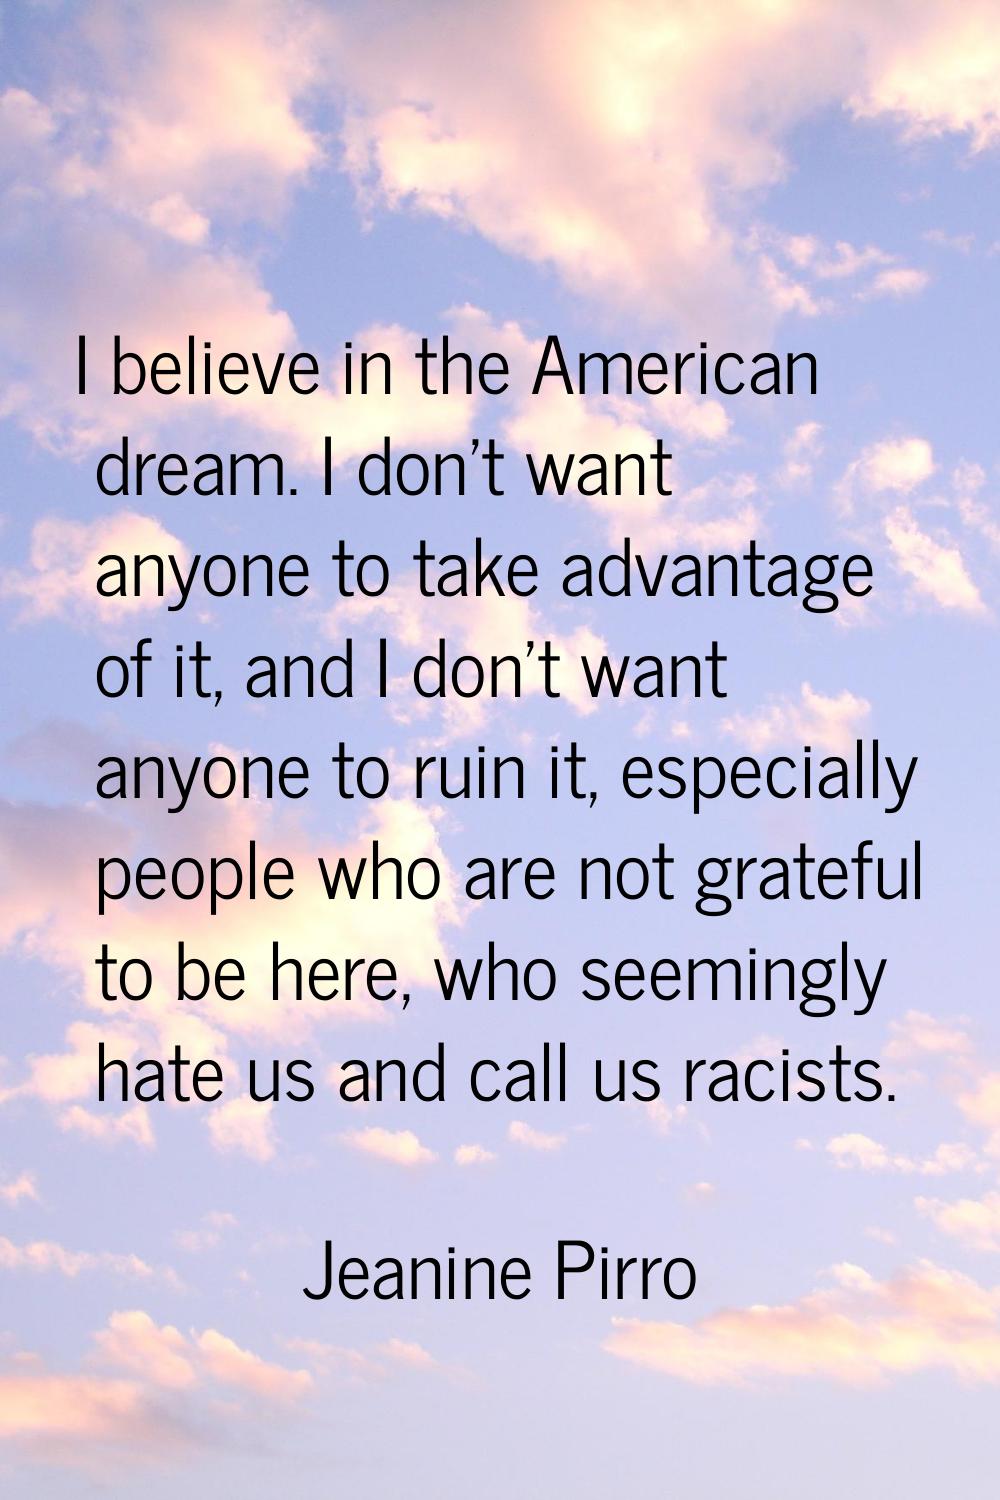 I believe in the American dream. I don't want anyone to take advantage of it, and I don't want anyo